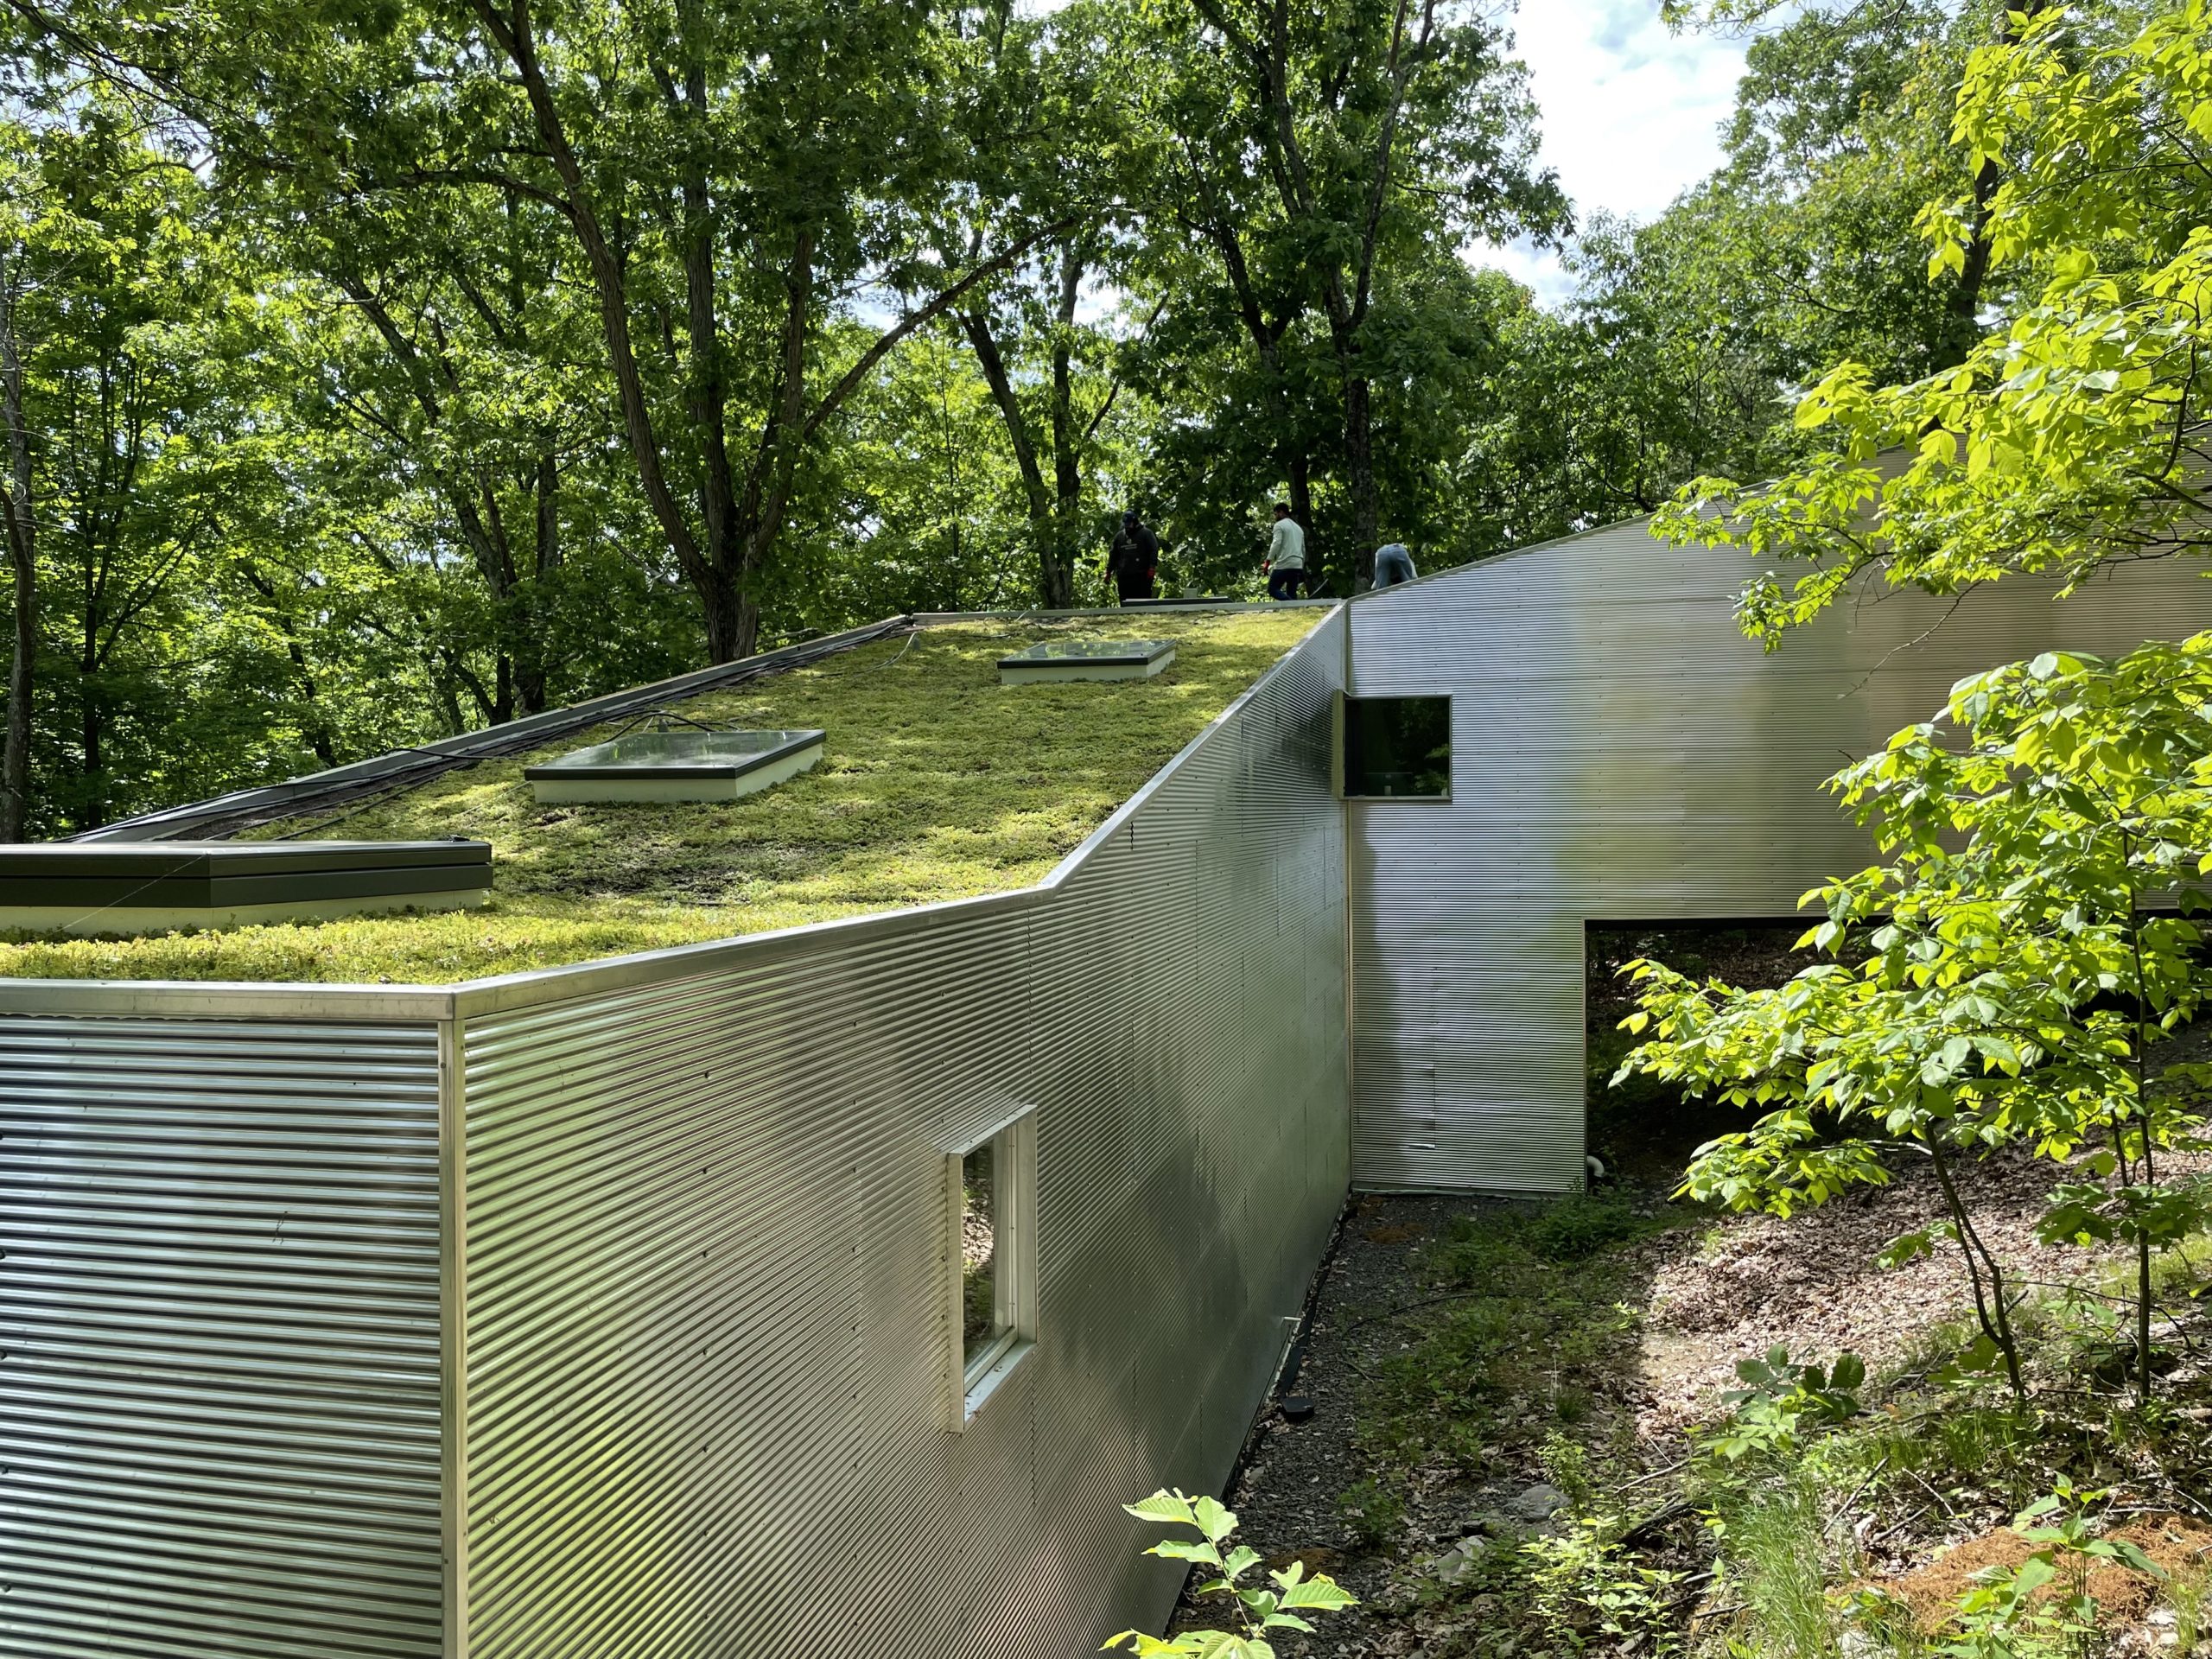 Green Roof installed at the Archive and Research Library in Rhinebeck, NY